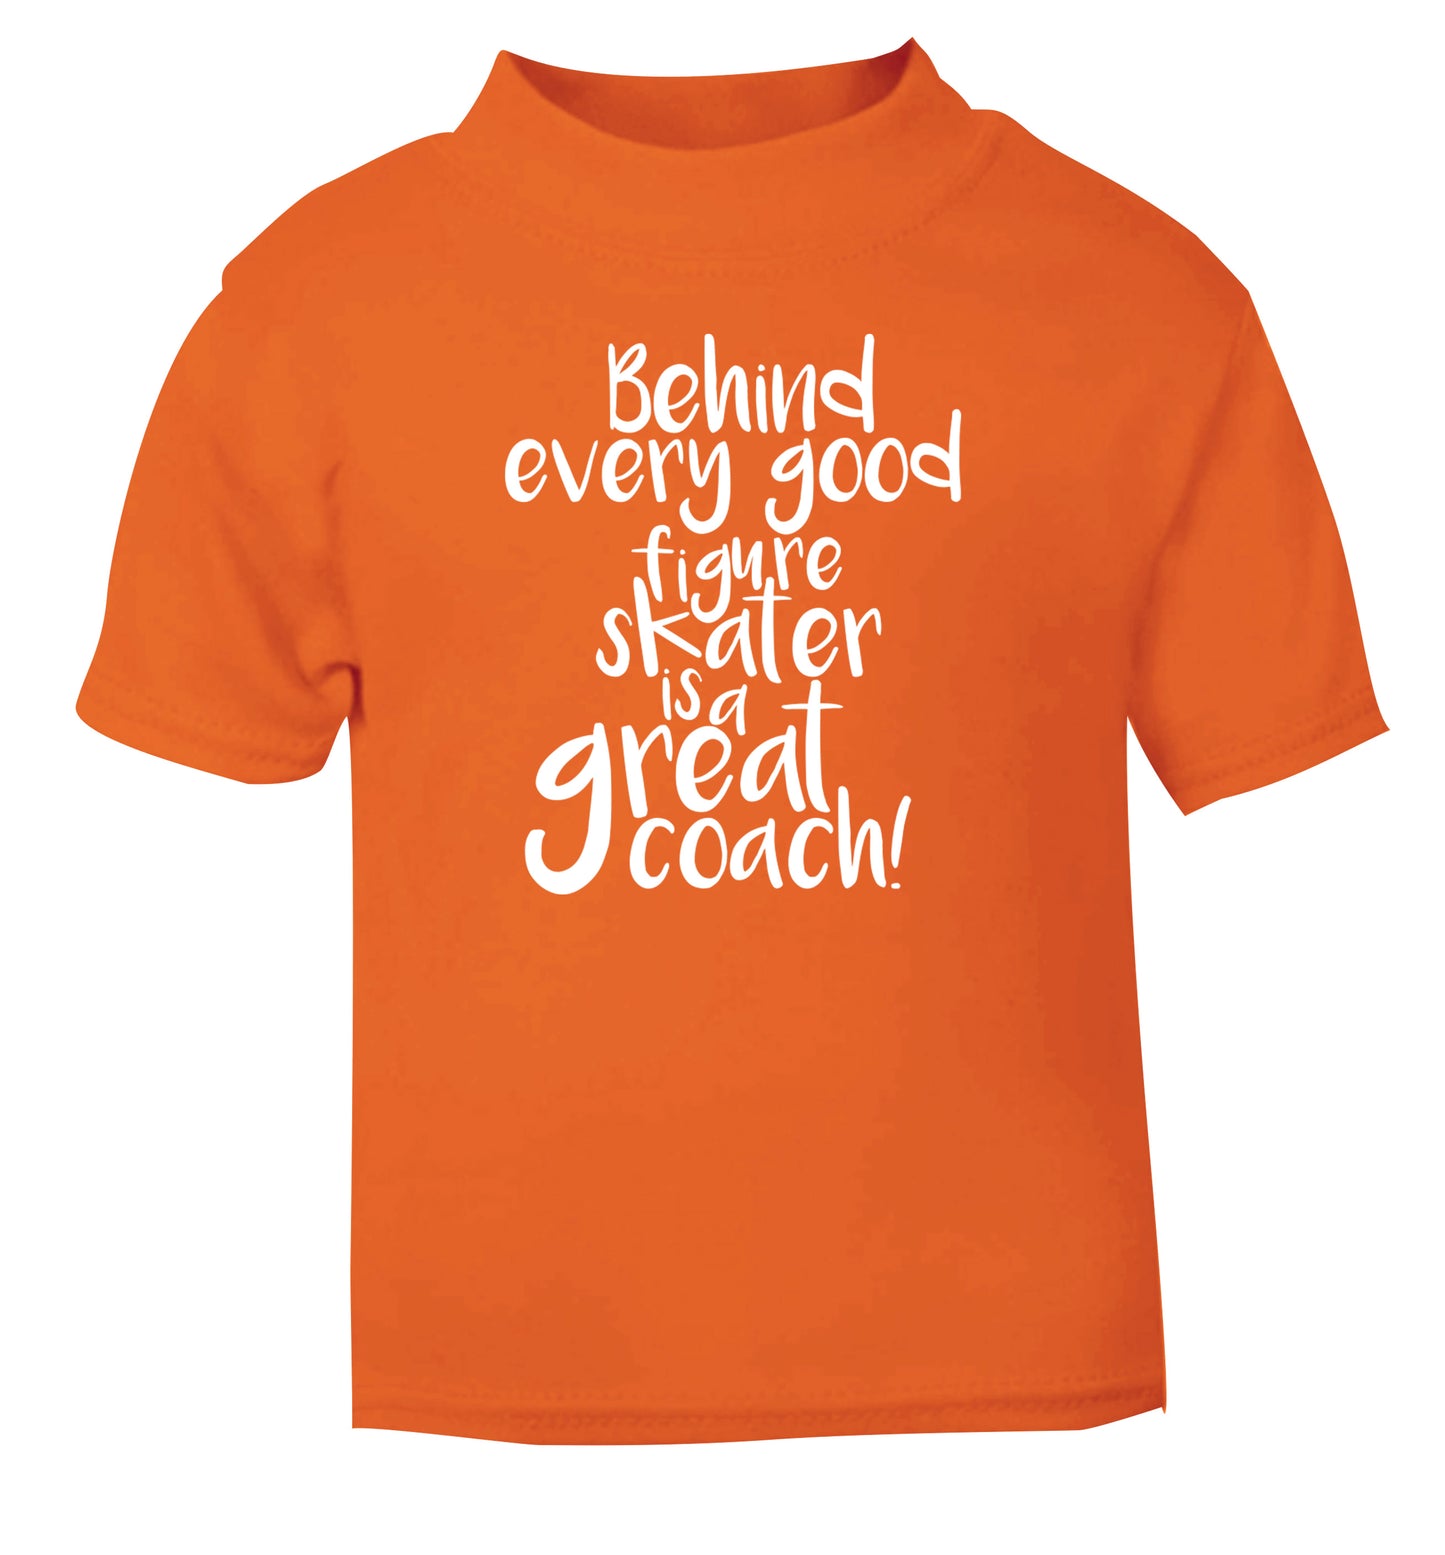 Behind every good figure skater is a great coach orange Baby Toddler Tshirt 2 Years